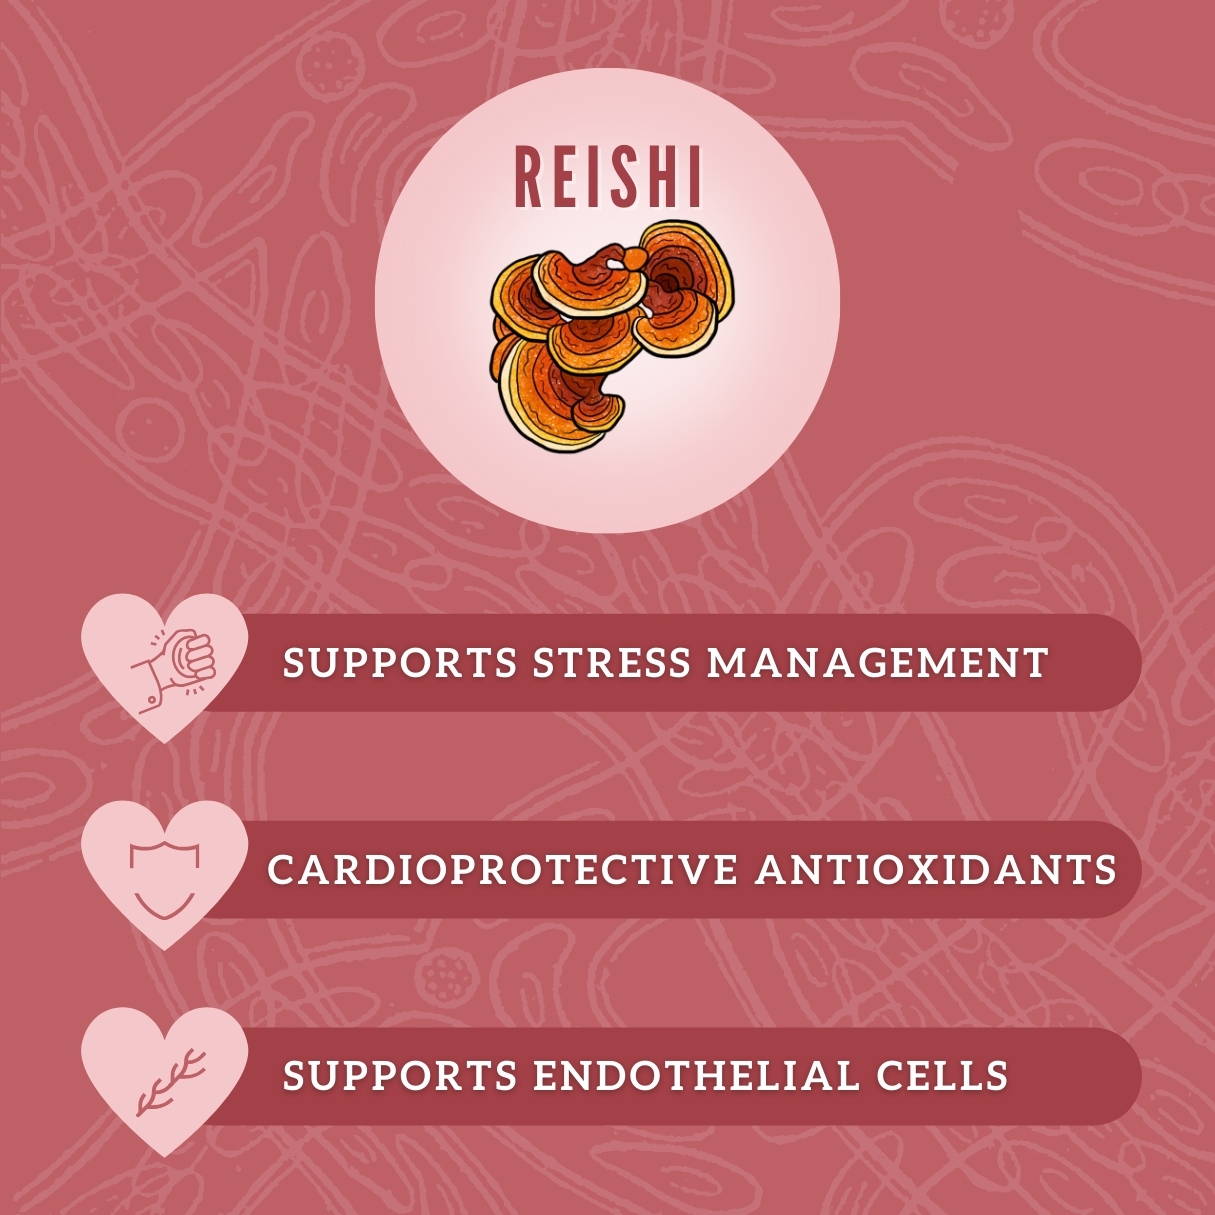 Reishi Mushrooms Suppors stress management, contains cardioprotective antioxidants, supports endothelial cells